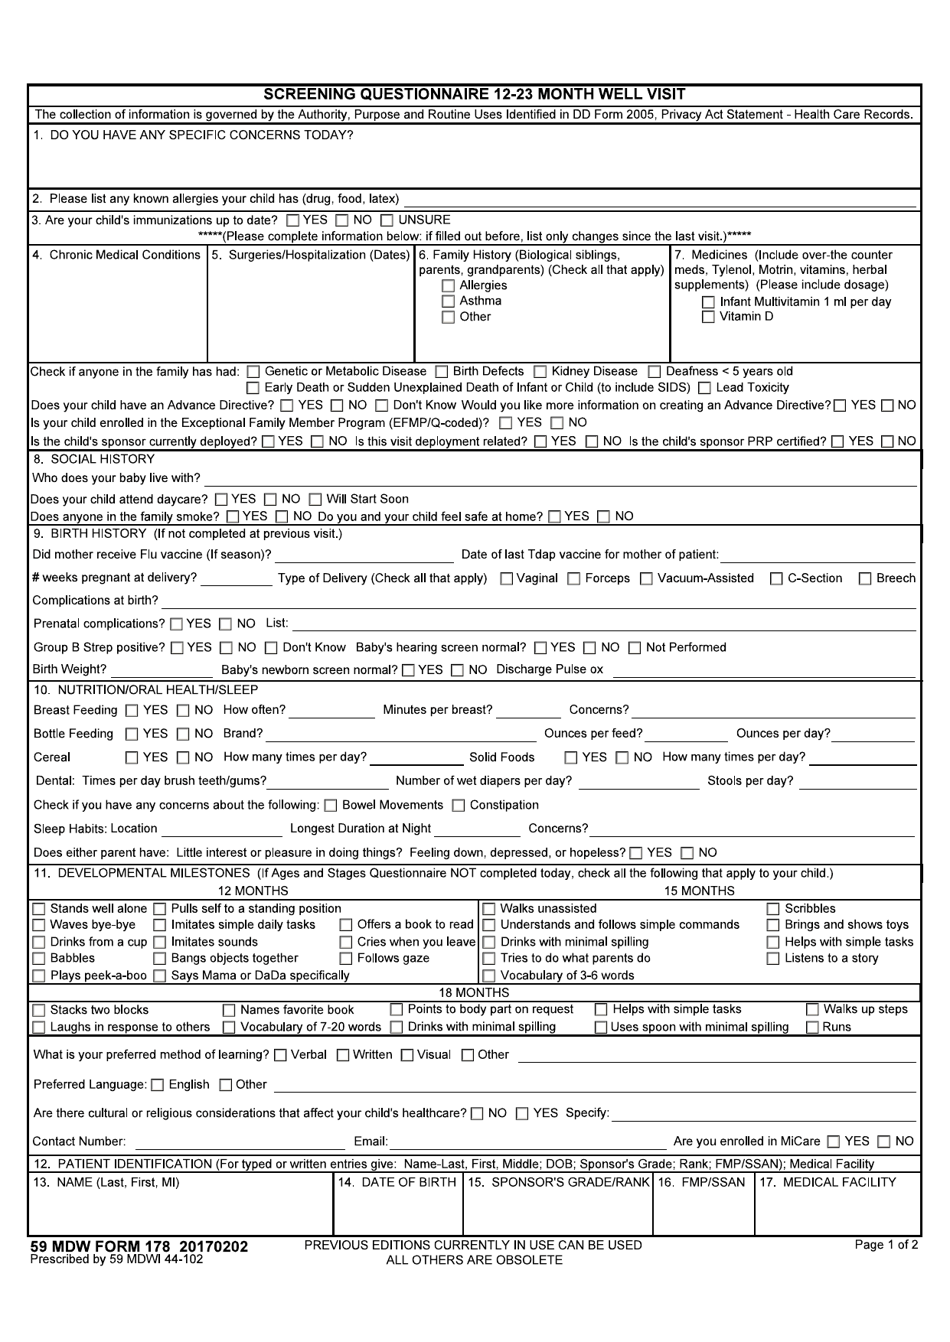 59 MDW Form 178 Screening Questionnaire 12-23 Month Well Visit, Page 1